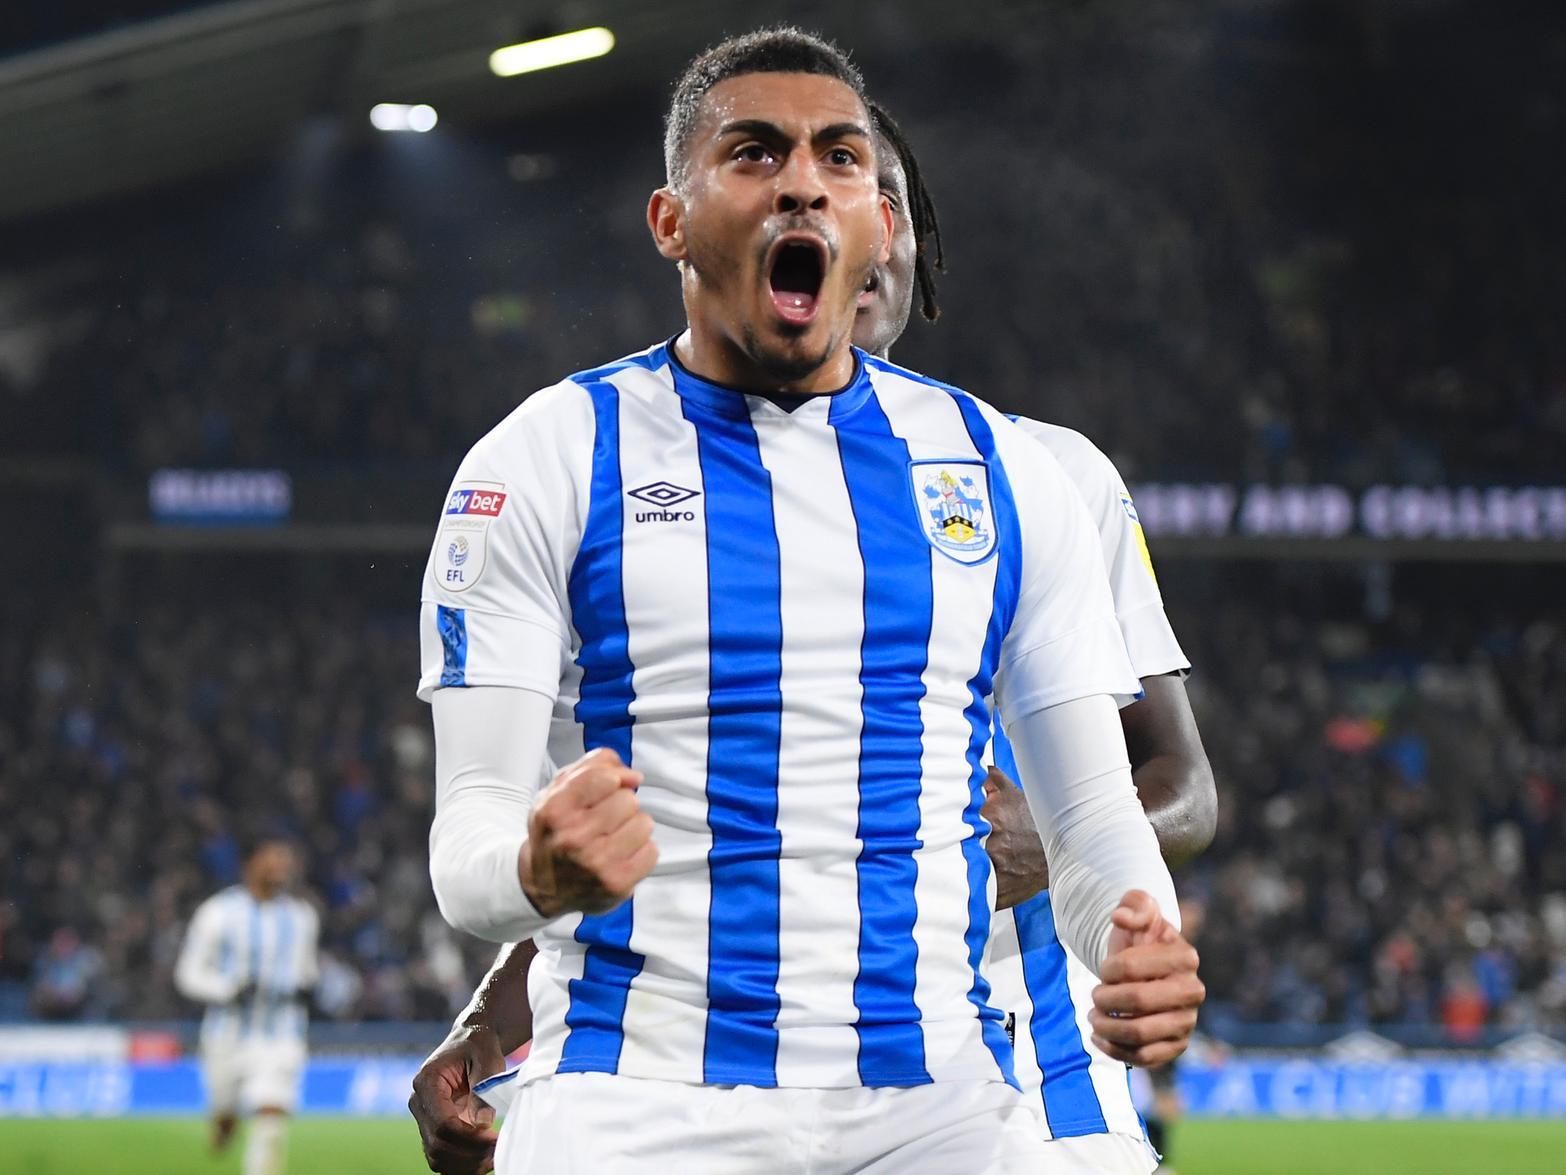 Huddersfield Town manager Danny Cowley has revealed that star forward Karlan Grant could return from injury to face Derby this weekend. He's scored 13 goals in 30 matches so far this season. (Huddersfield Examiner)